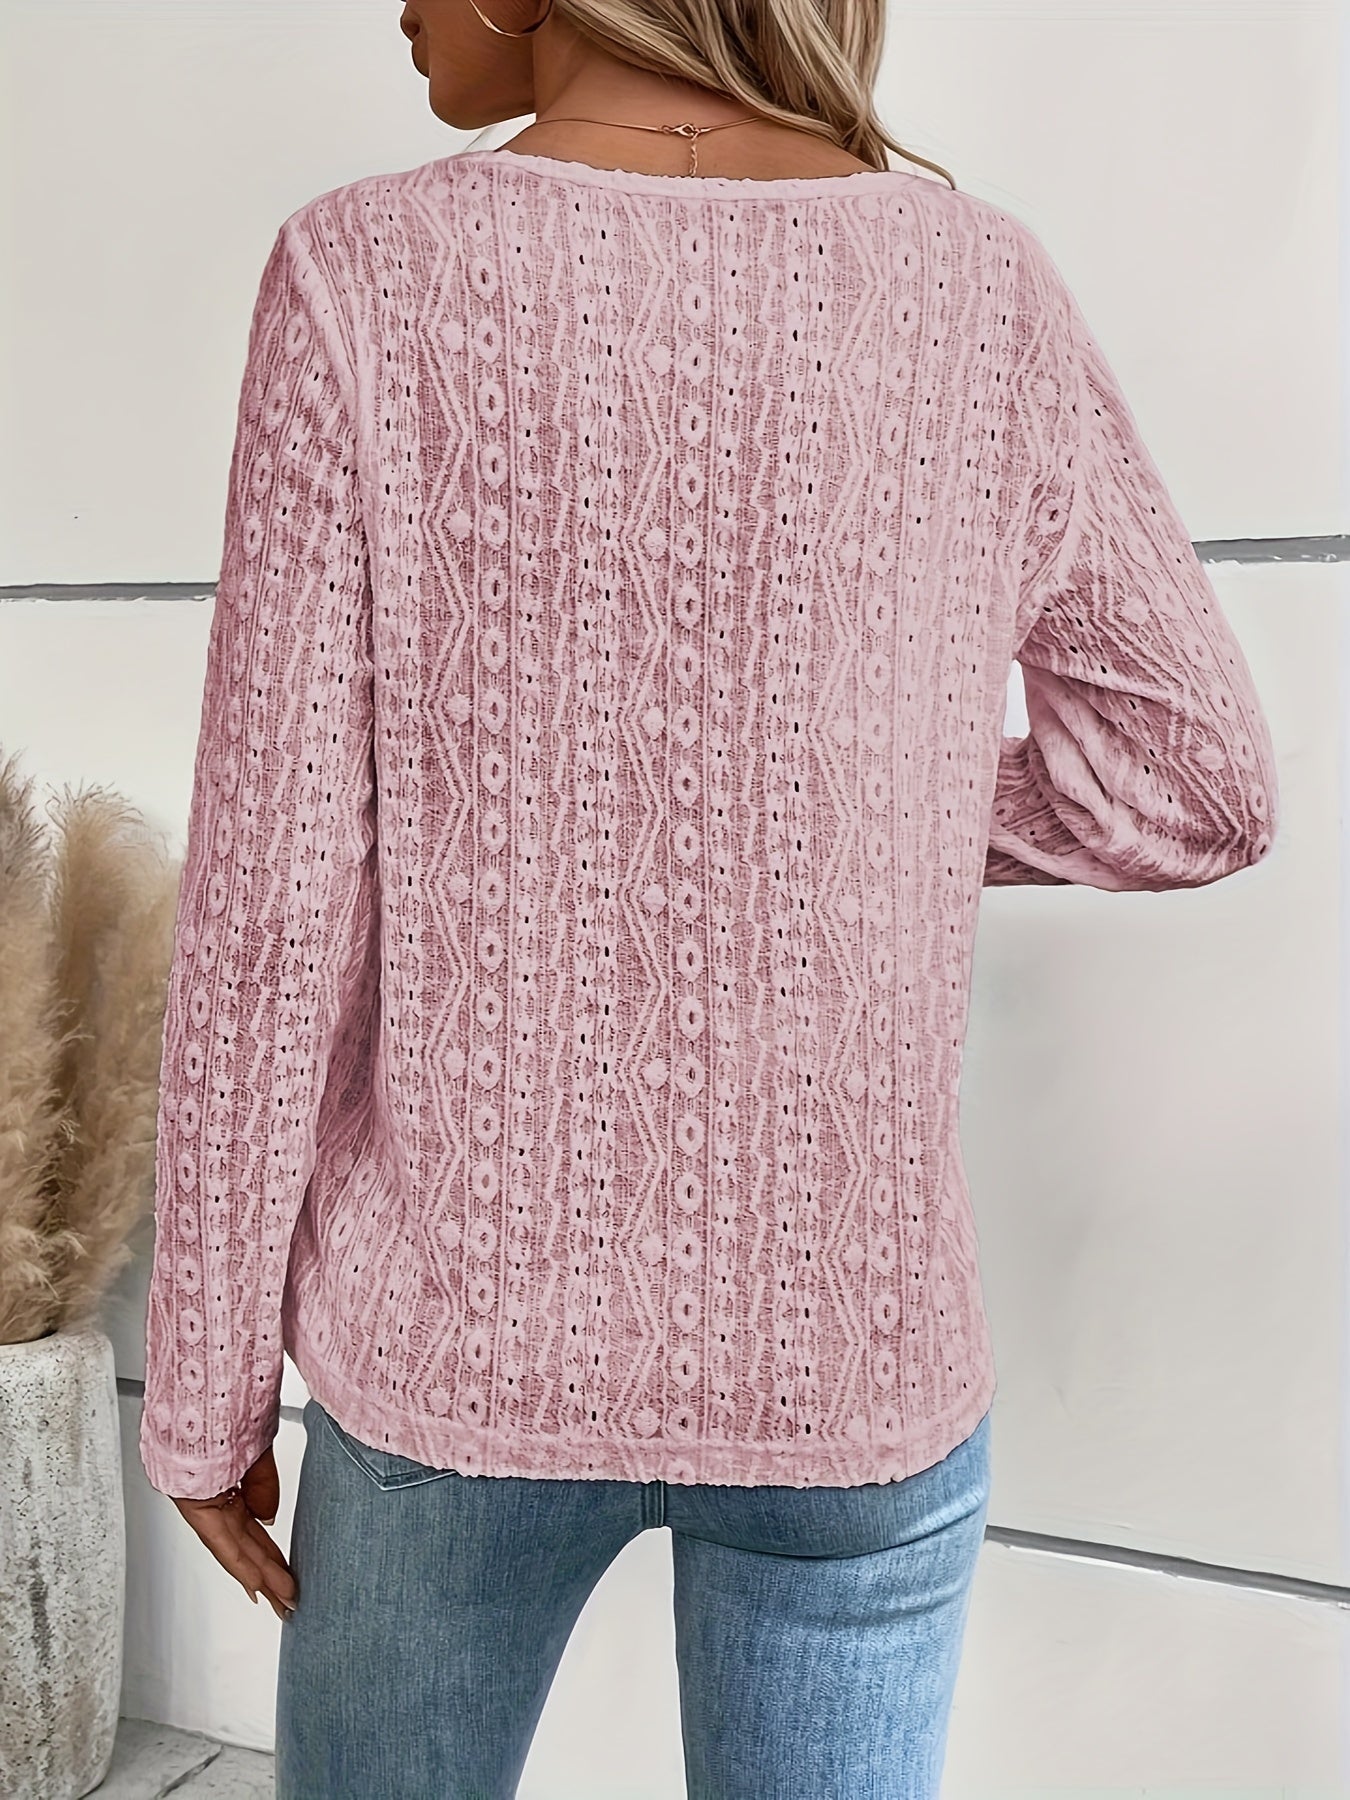 Floral Pattern Eyelet Button Front Blouse, Casual Long Sleeve Blouse For Spring & Fall, Women's Clothing